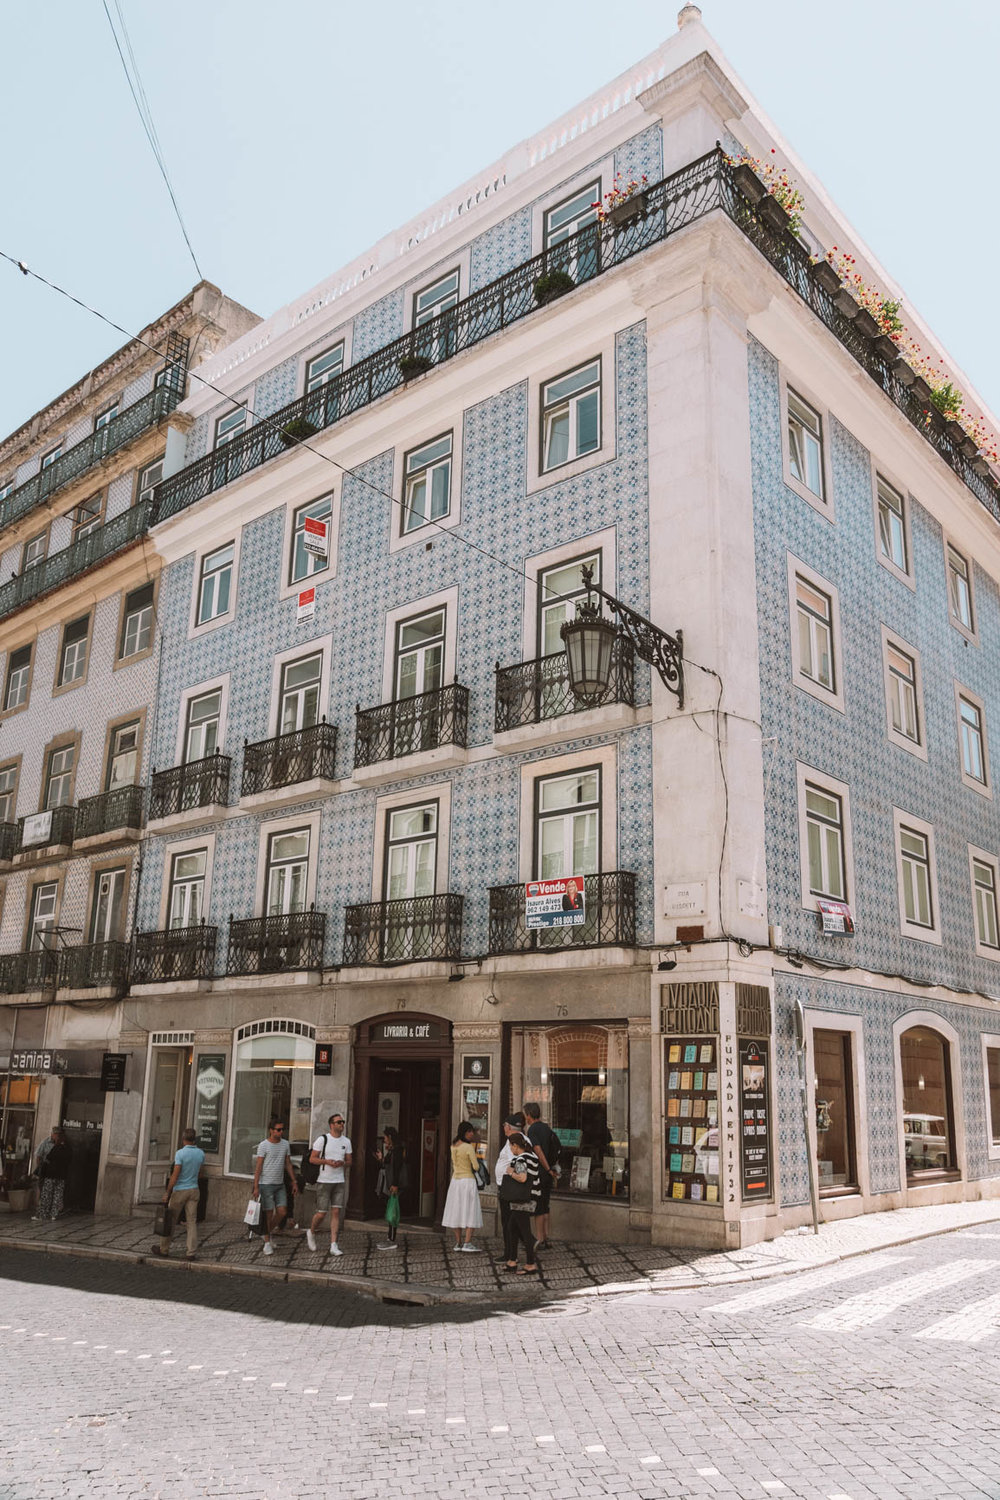 2 -3  Days itinerary - Things to do in Lisbon and your complete guide - Explore Baixa and Chiado #Lisbon #Portugal